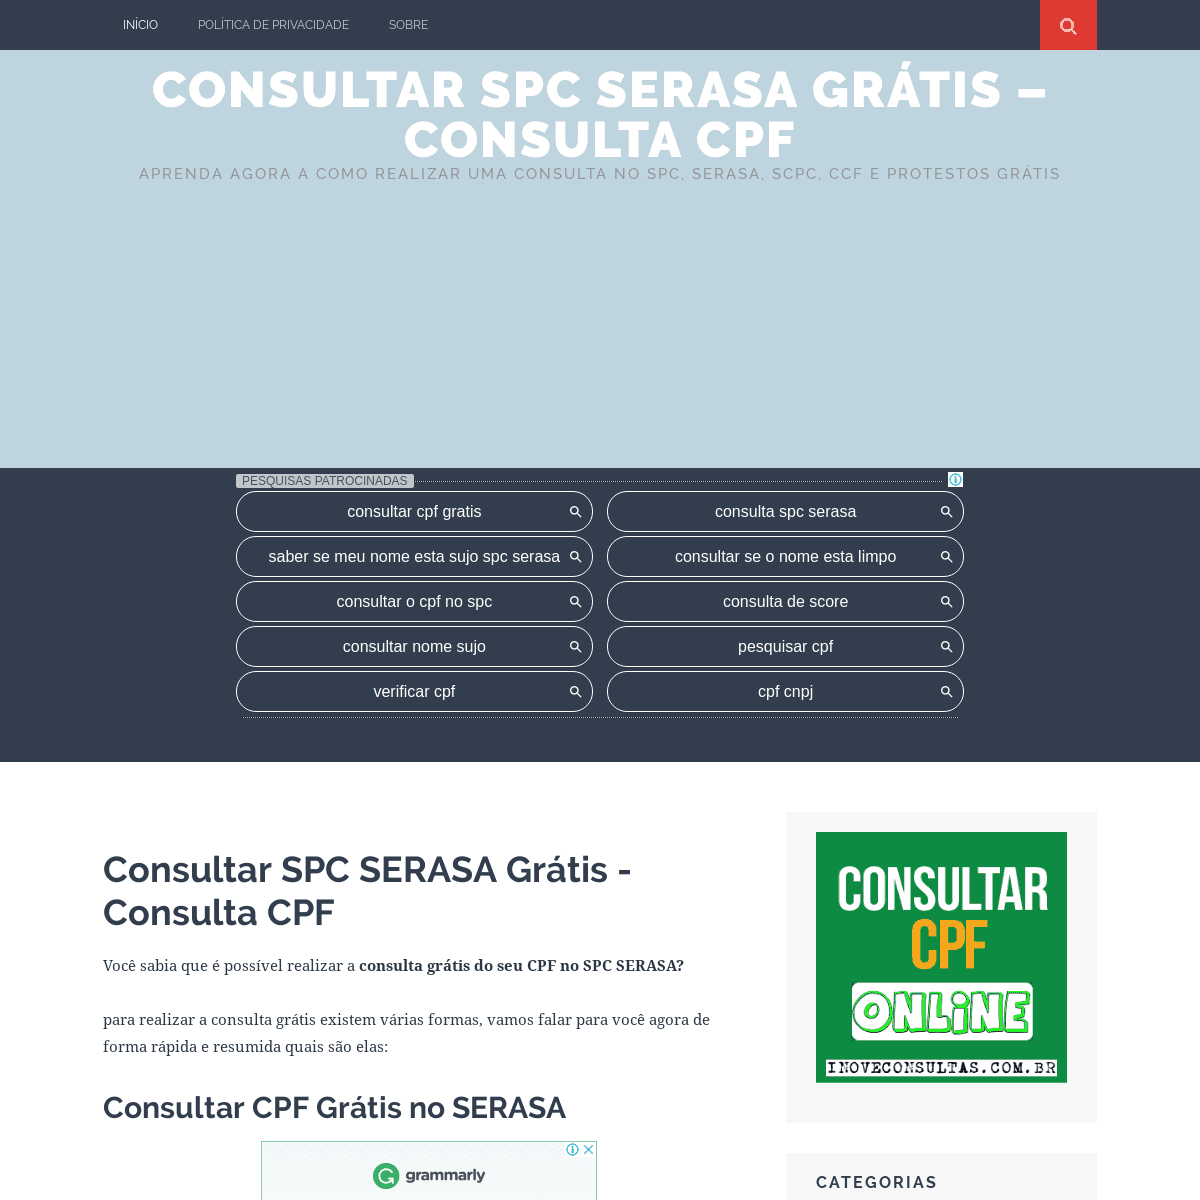 A complete backup of consultarcpfgratis.org